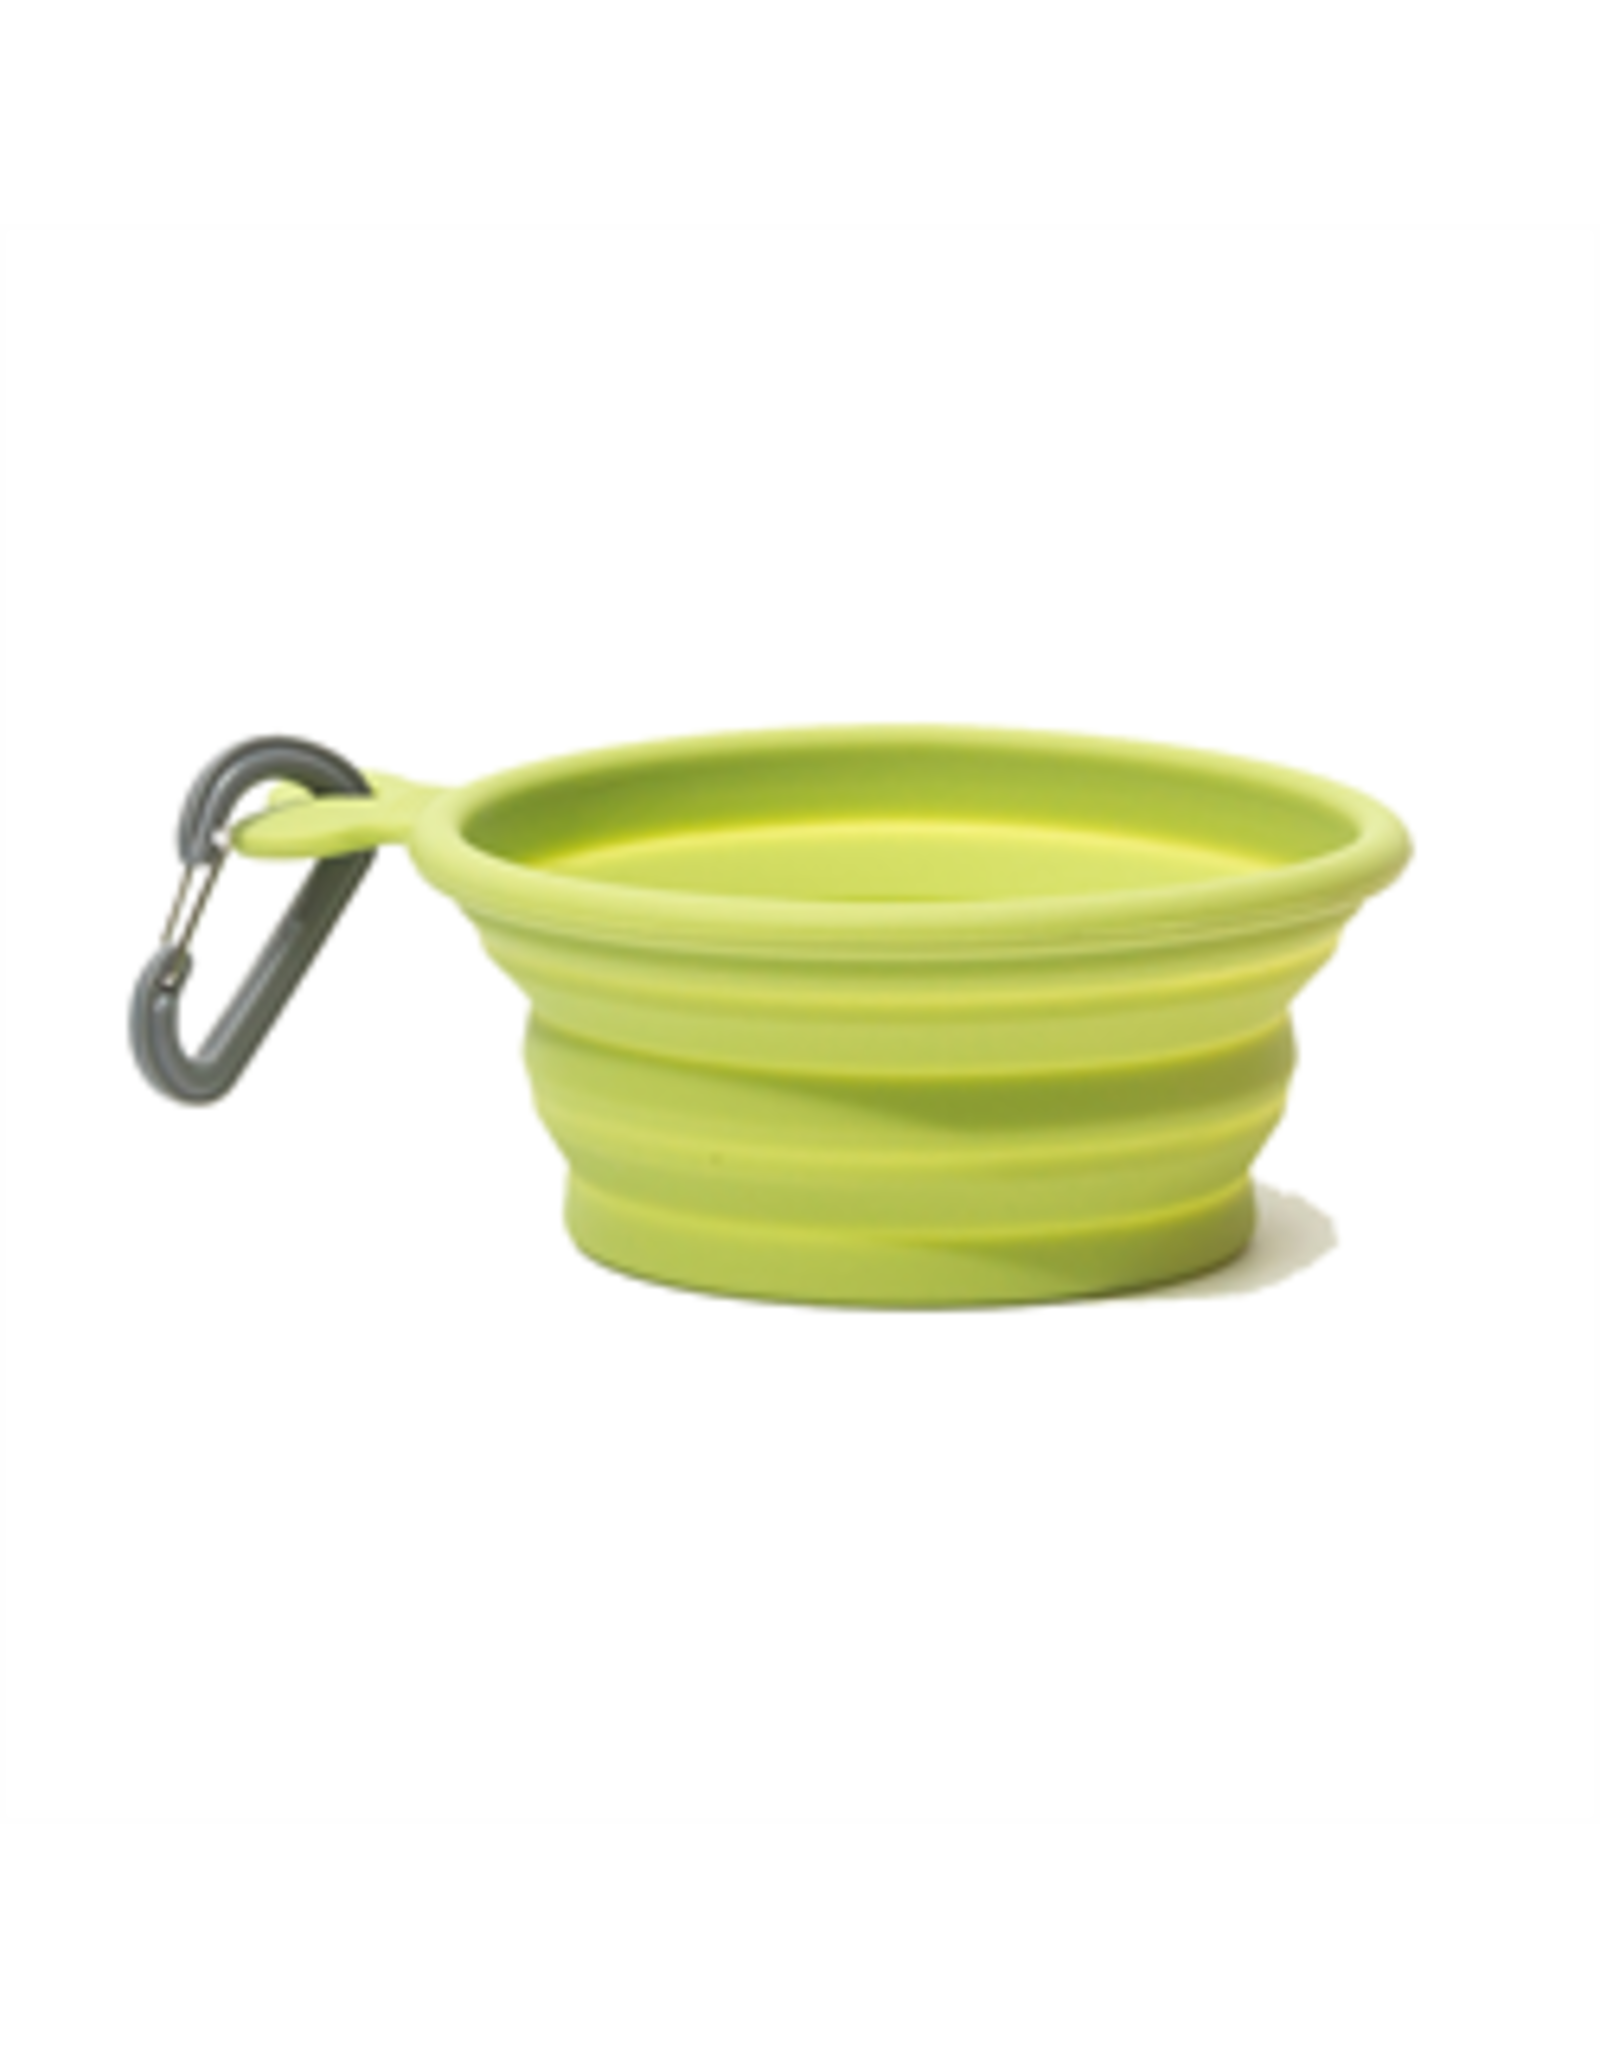 MessyMutts MessyMutts - Silicone Collapsible Bowl - 3cup - Green